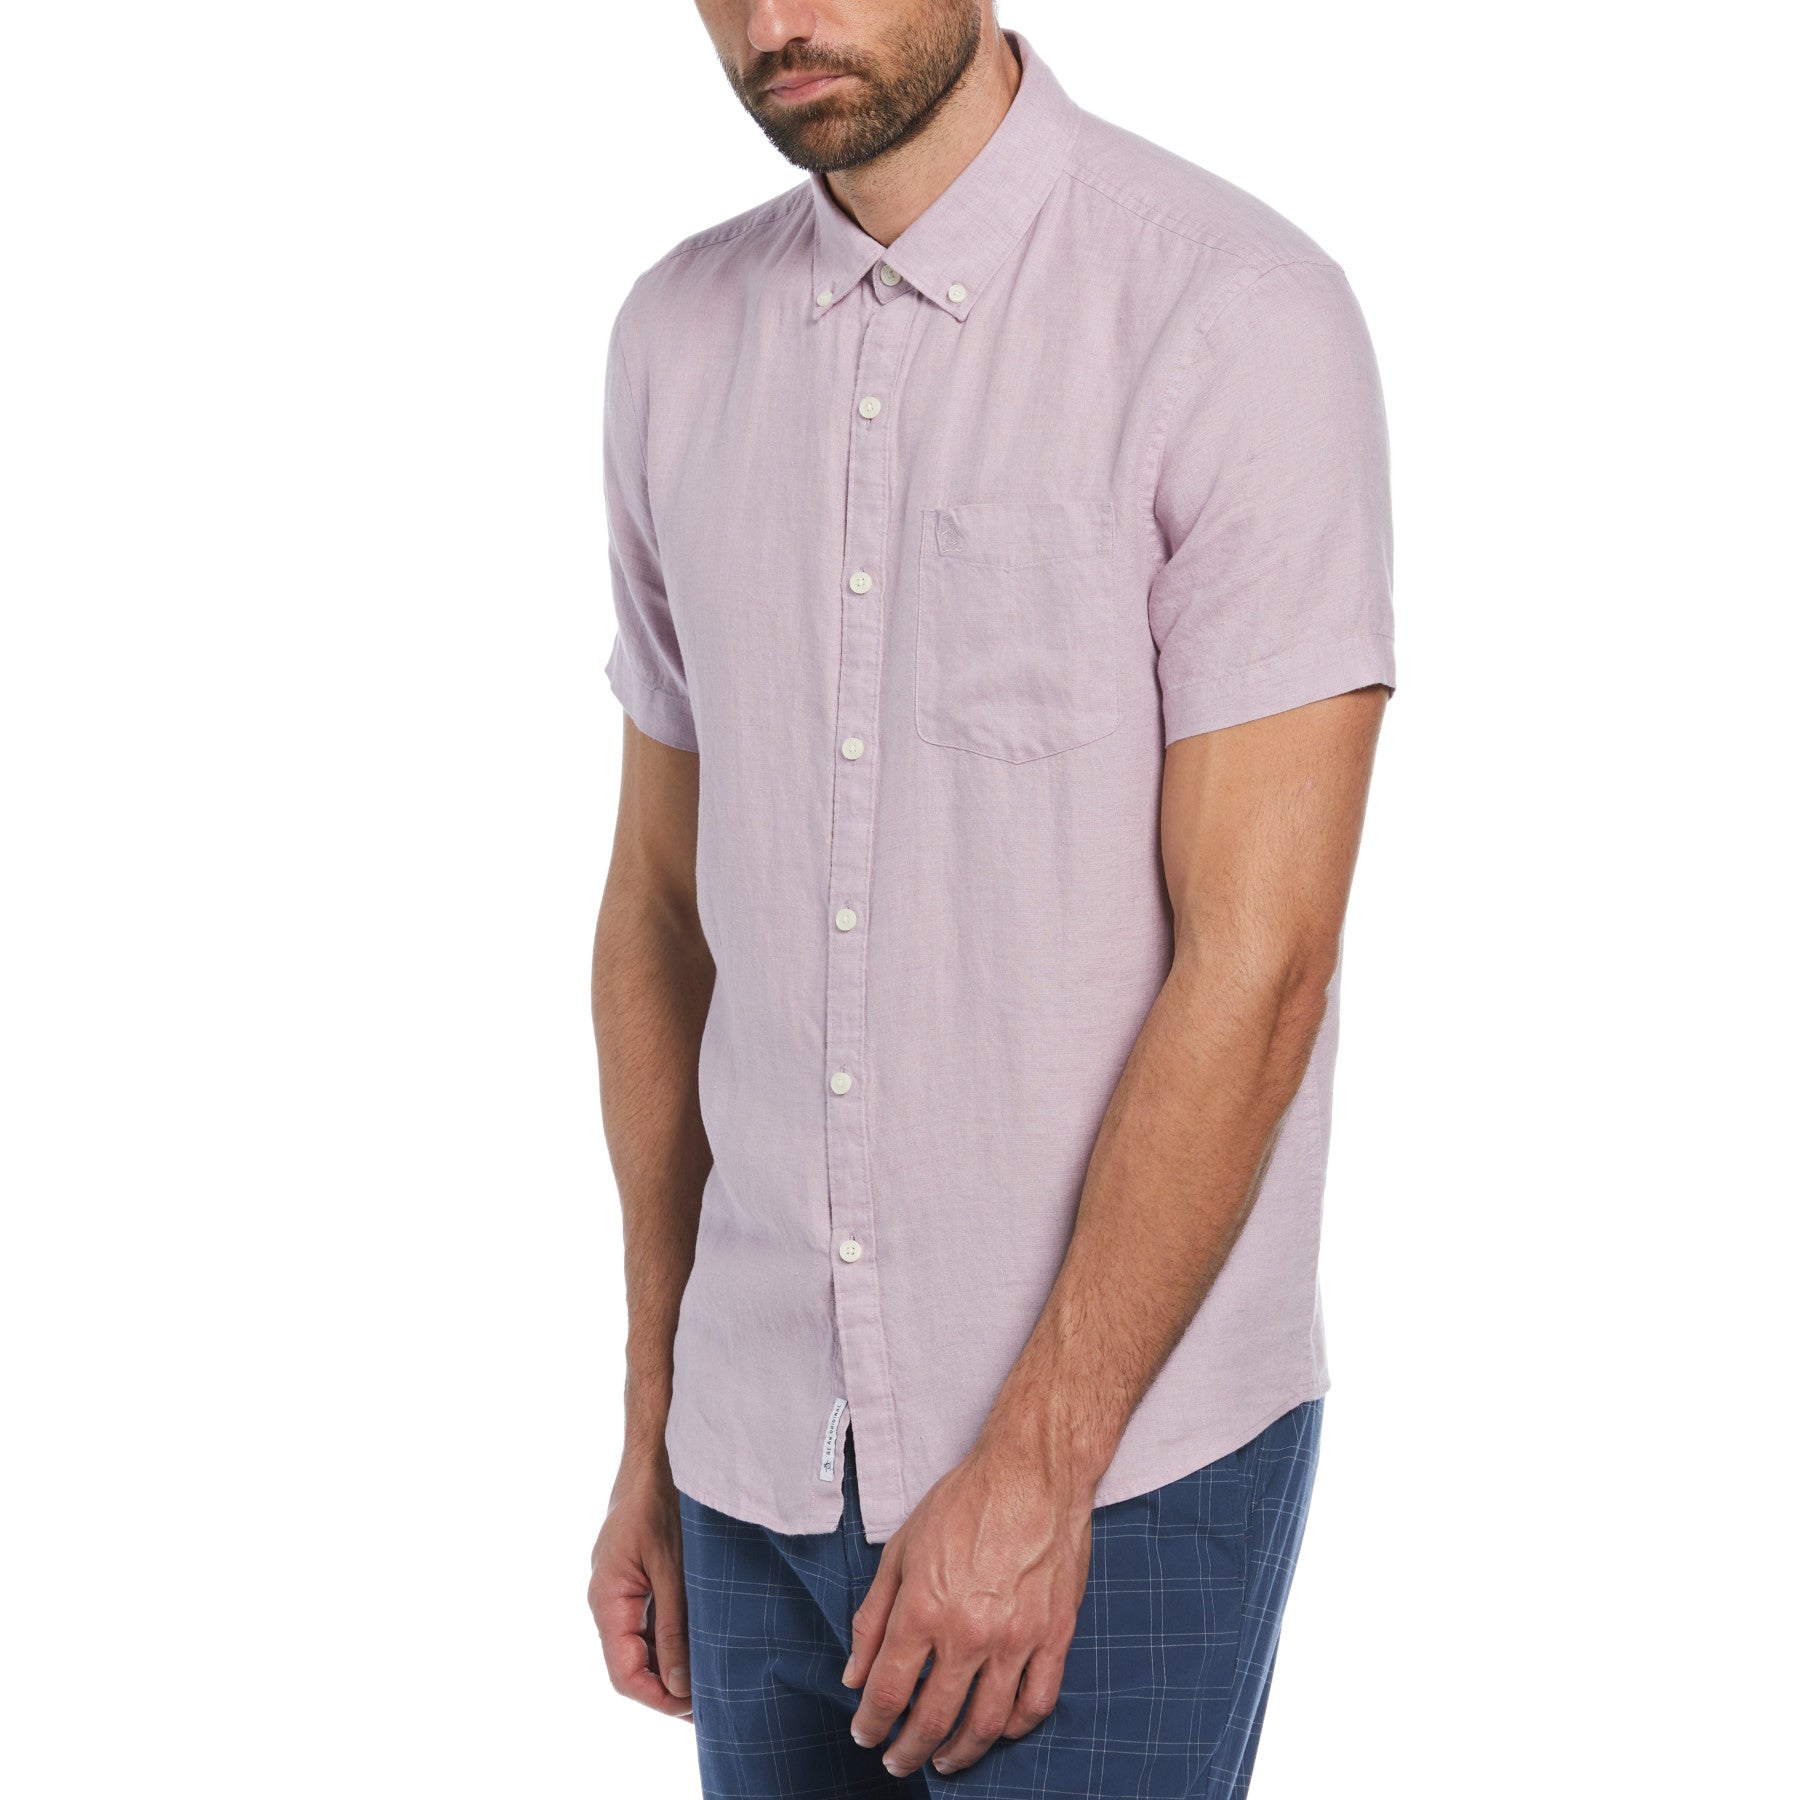 View Delave Linen Short Sleeve ButtonDown Shirt With Chest Pocket In Laven information